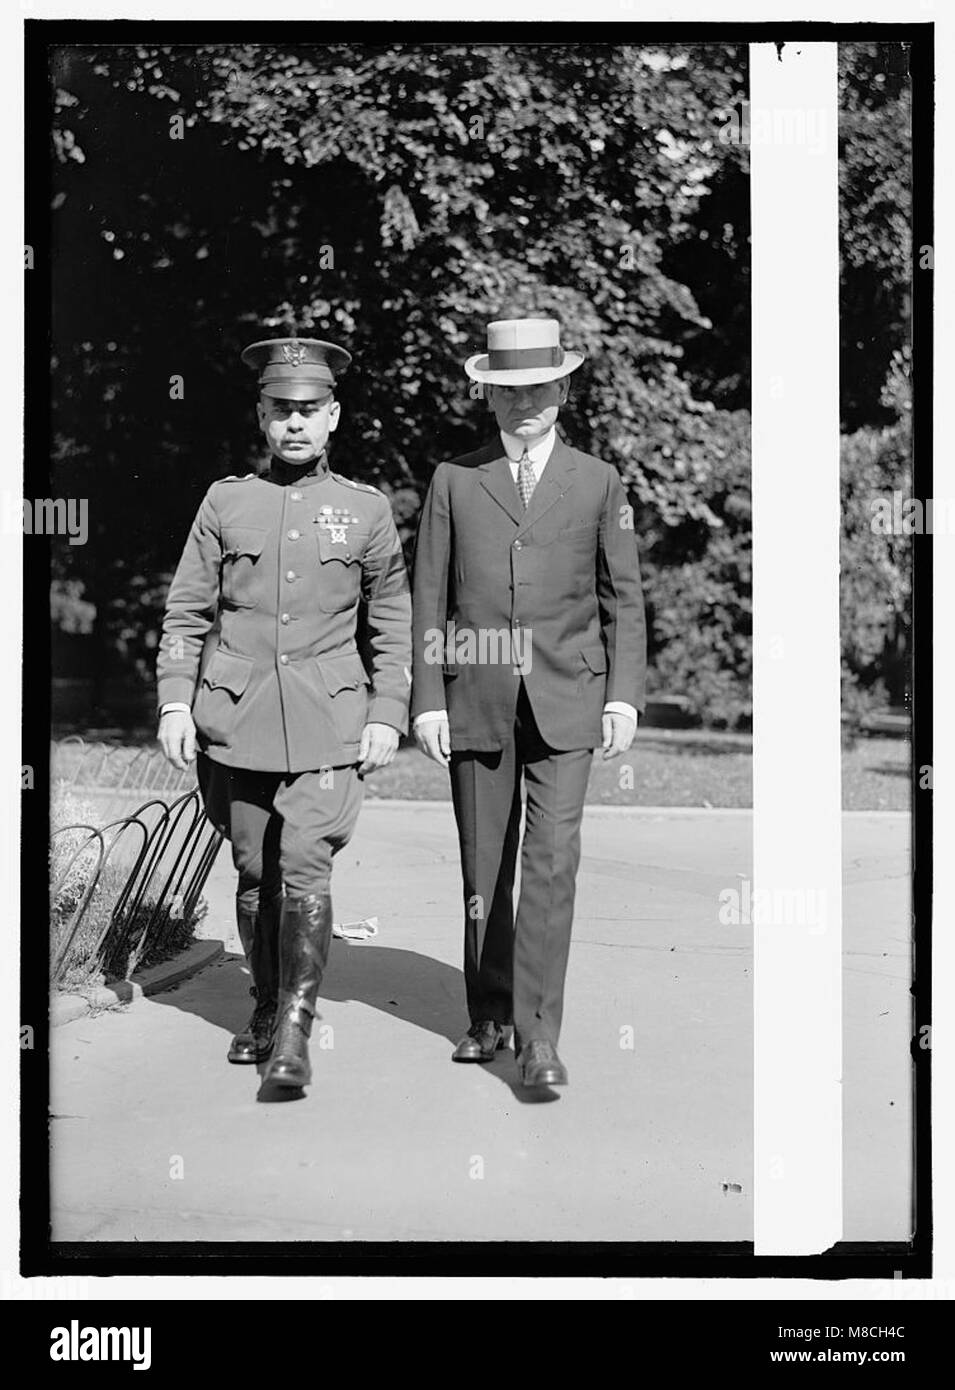 HARRIS, PETER CHARLES. MAJOR GENERAL, U.S.A. LEFT, WITH BROTHER, SEN. WILLIAM J. HARRIS, DIRECTOR OF CENSUS, 1913-1915; FEDERAL TRADE COMMR., 1915-1918; SENATOR FROM GEORGIA, 1919-1925 LCCN2016870309 Stock Photo